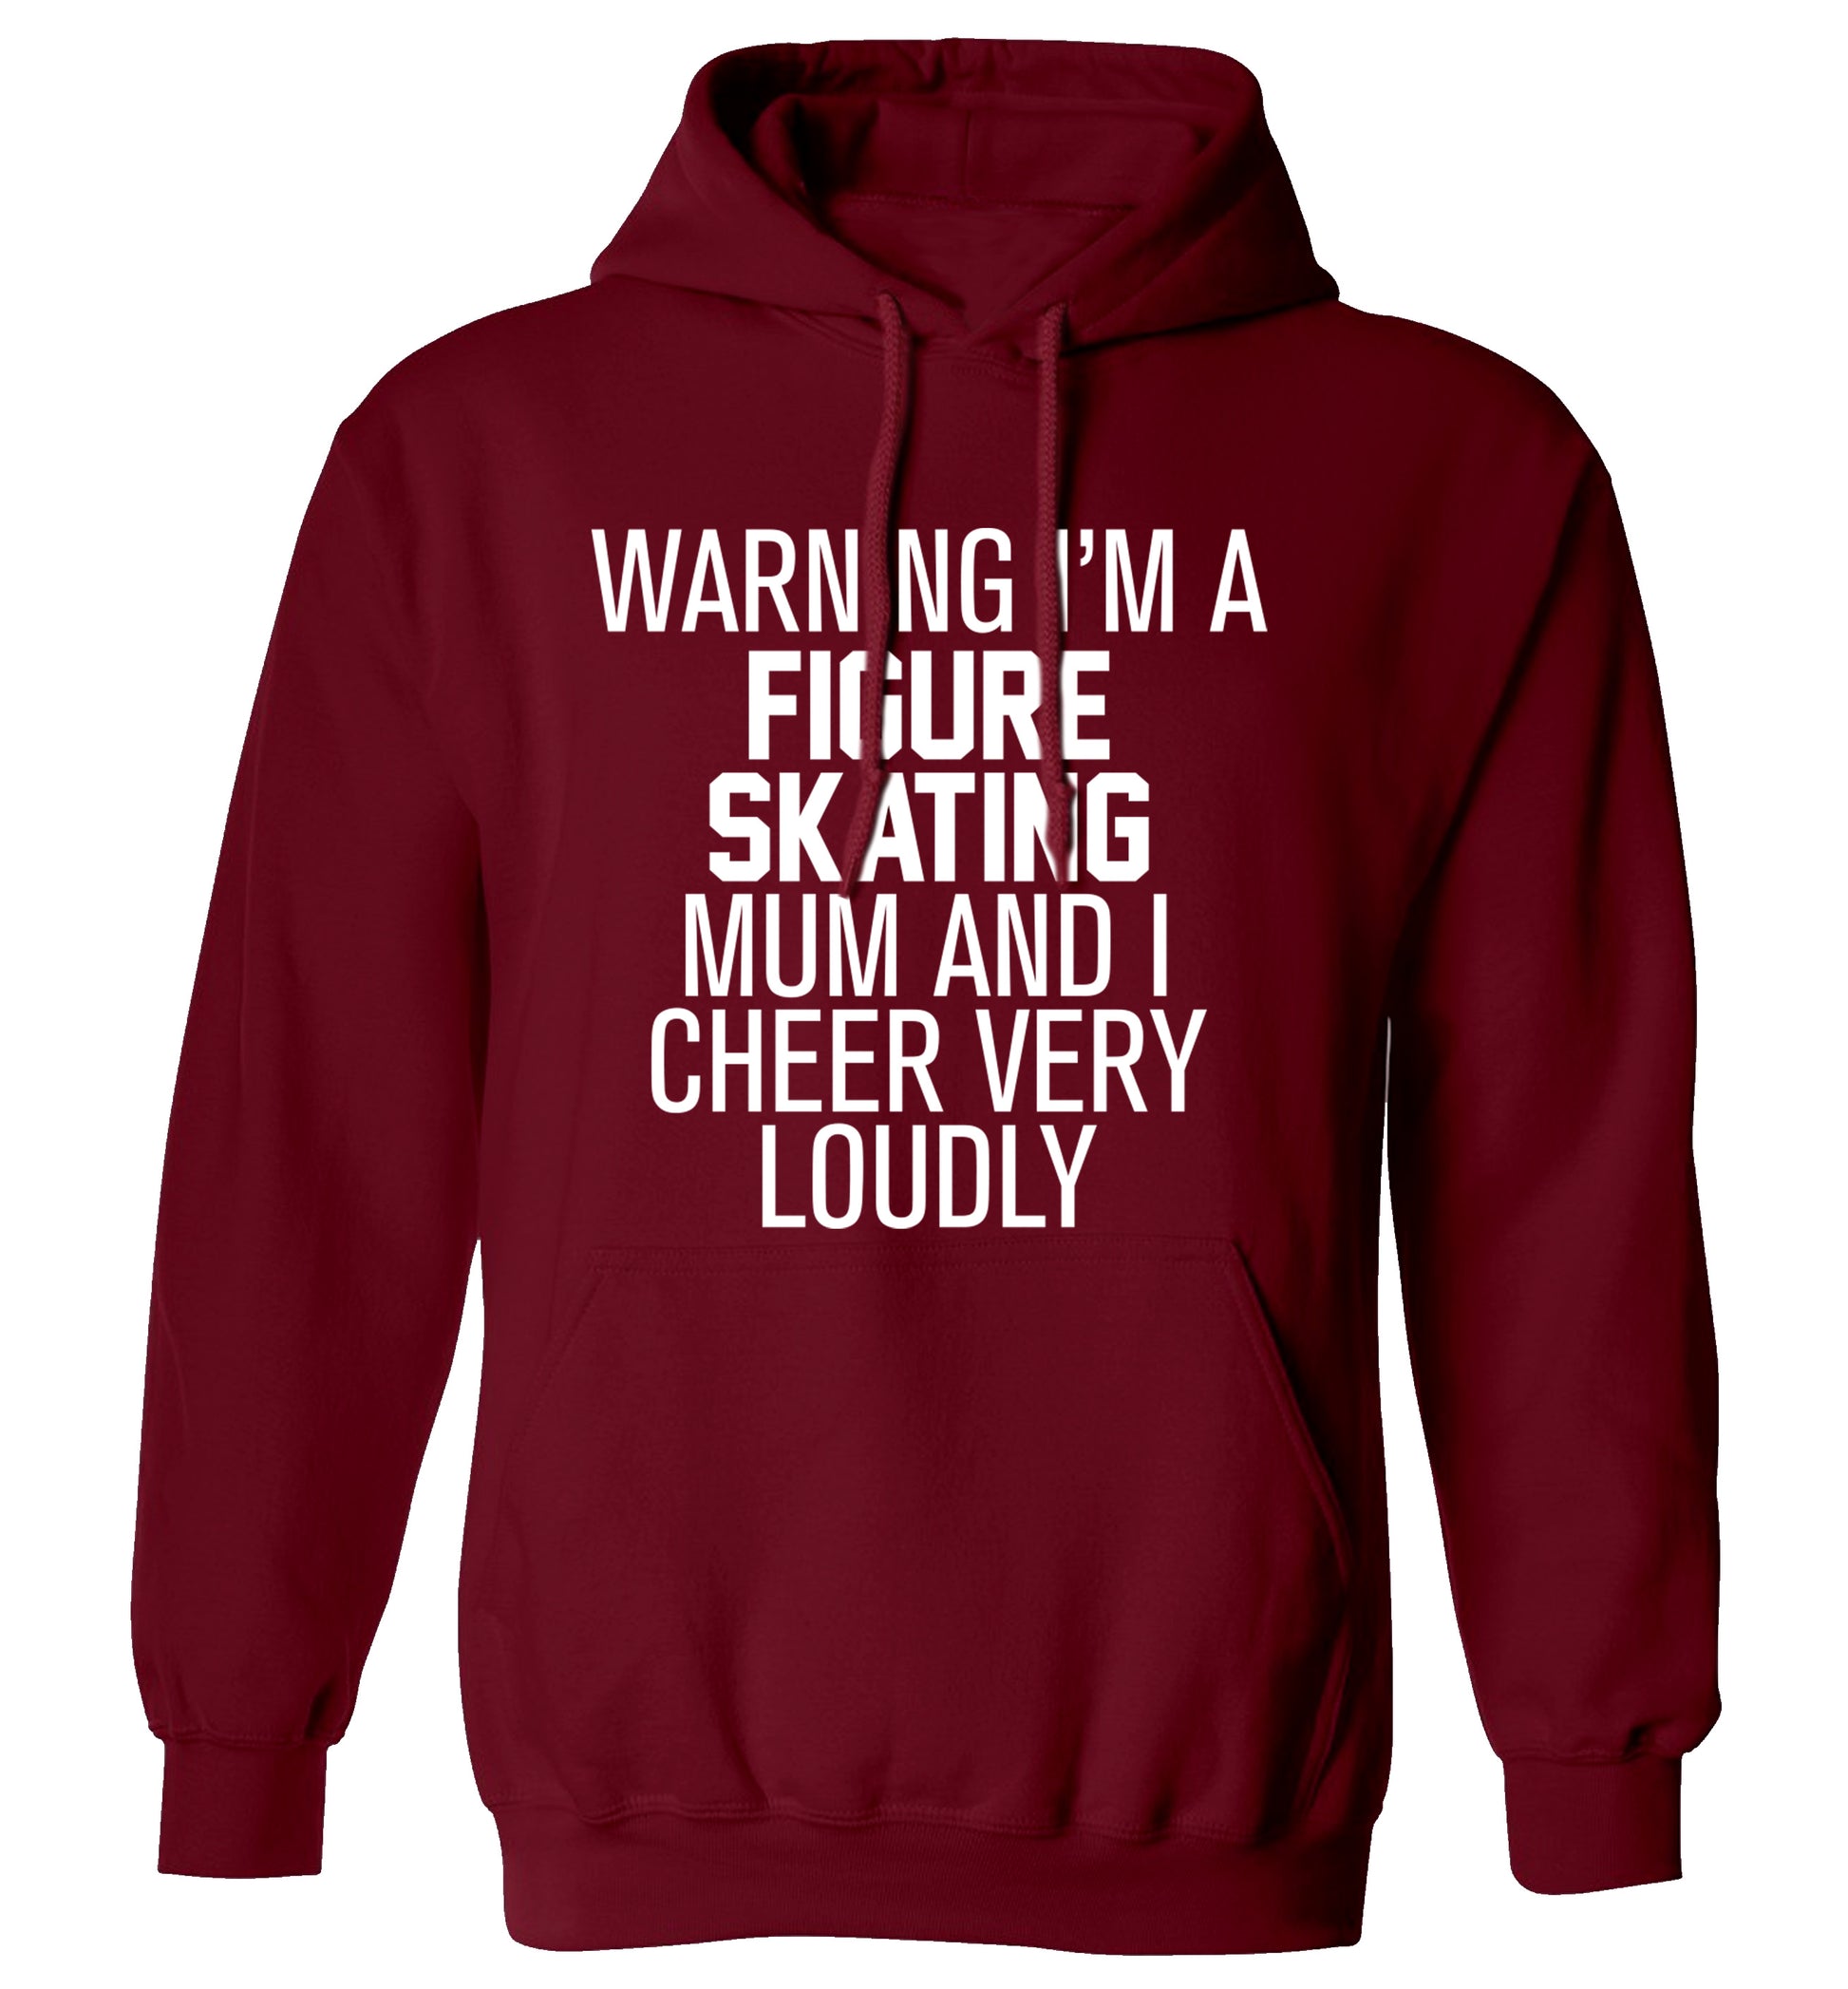 Warning I'm a figure skating mum and I cheer very loudly adults unisexmaroon hoodie 2XL